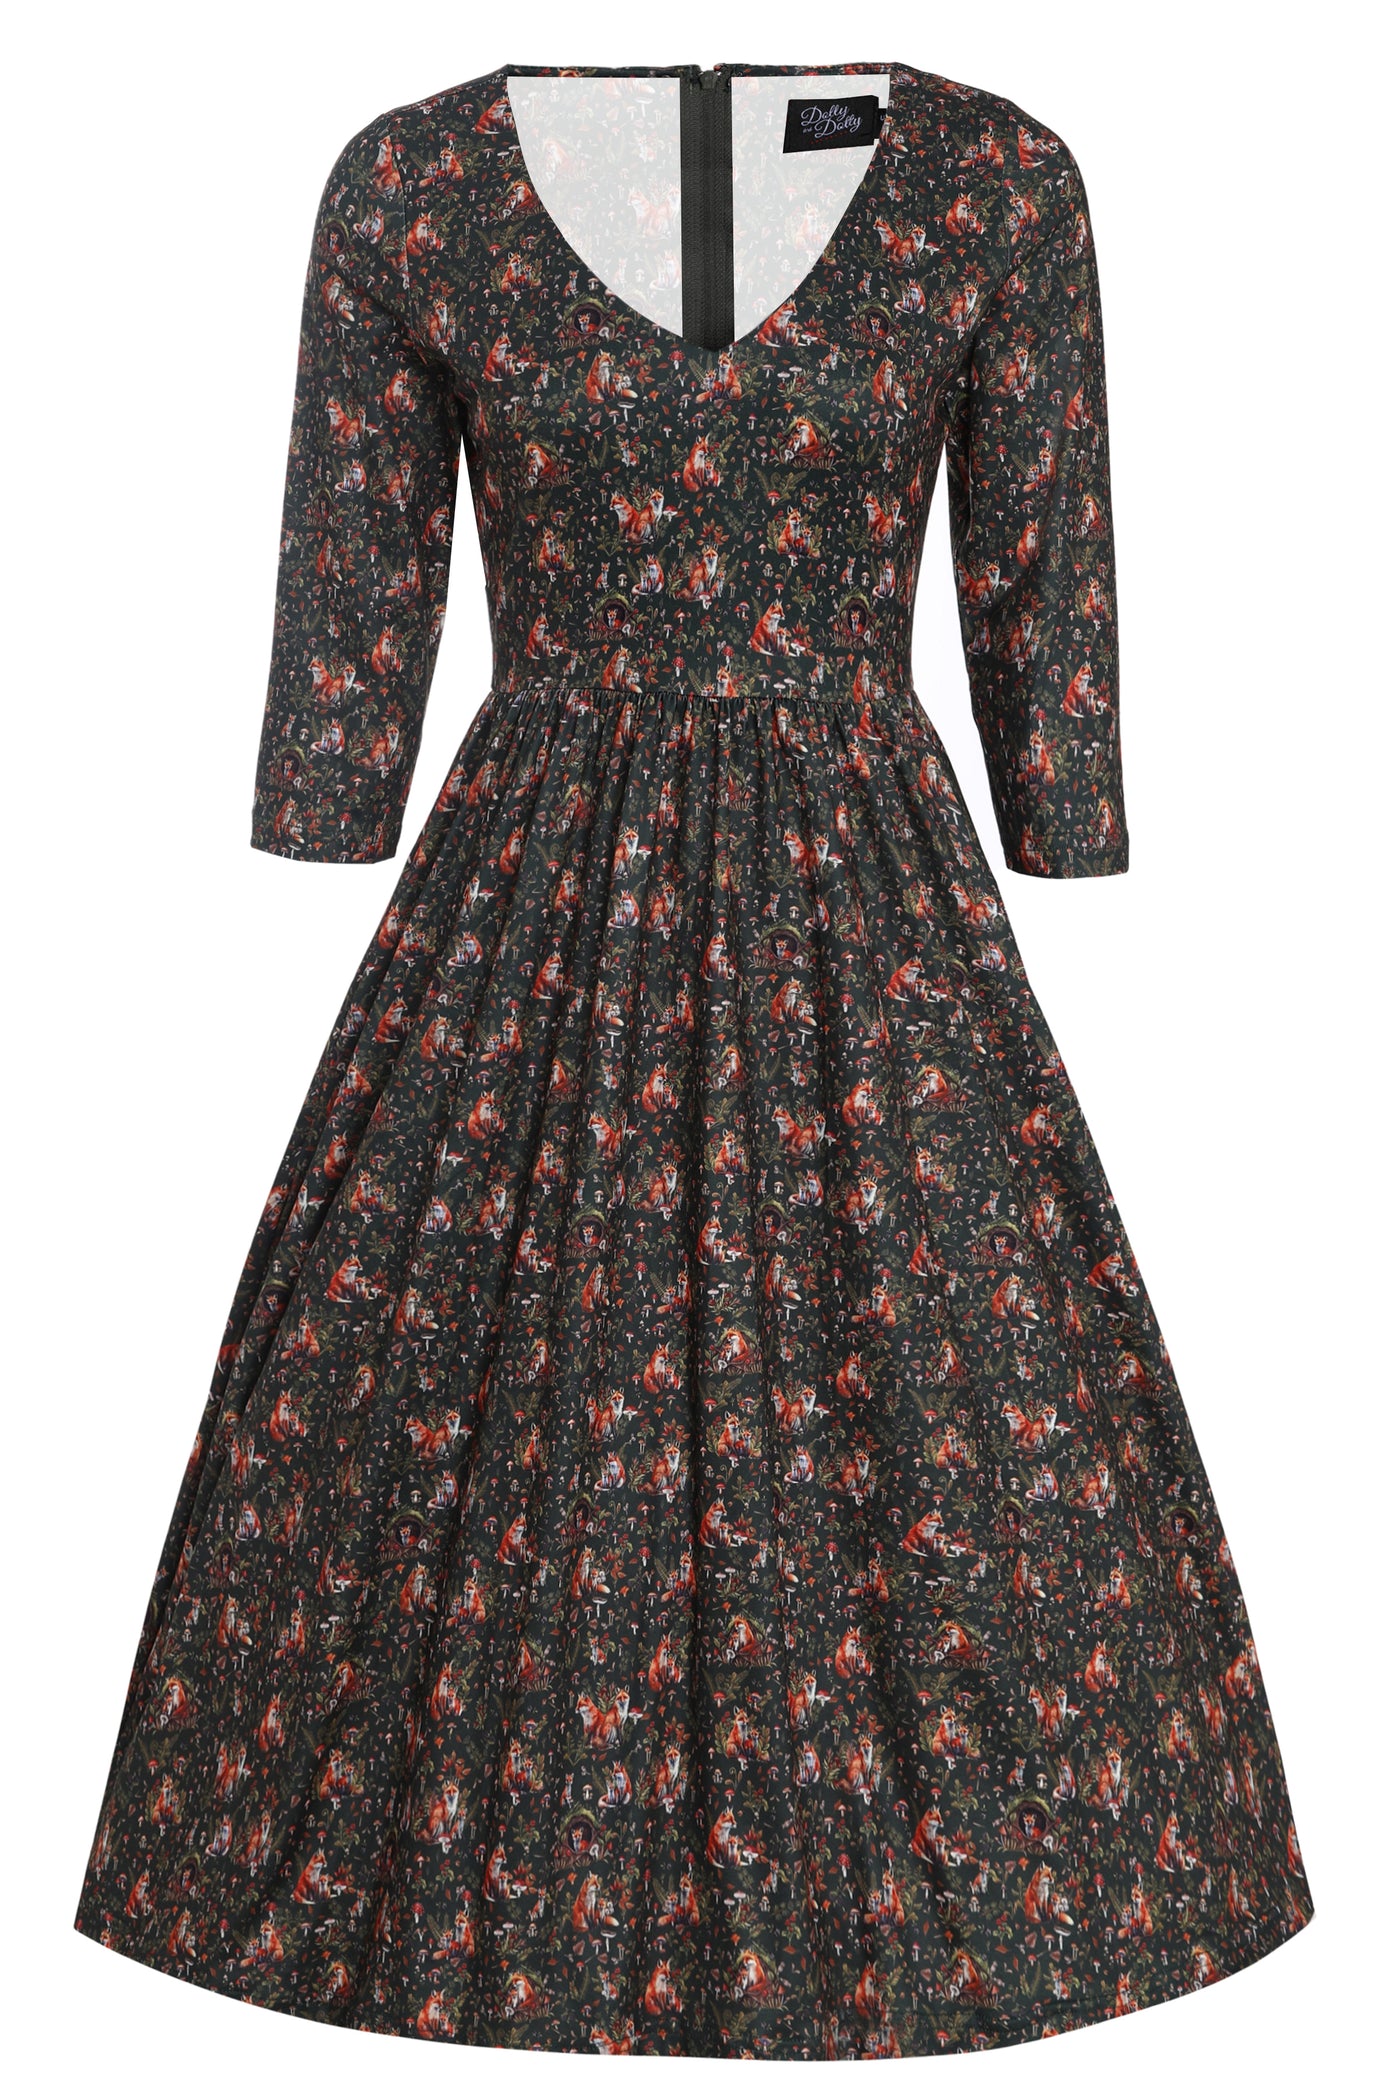 Front View of Woodland Fox Den Print Dress in Brown